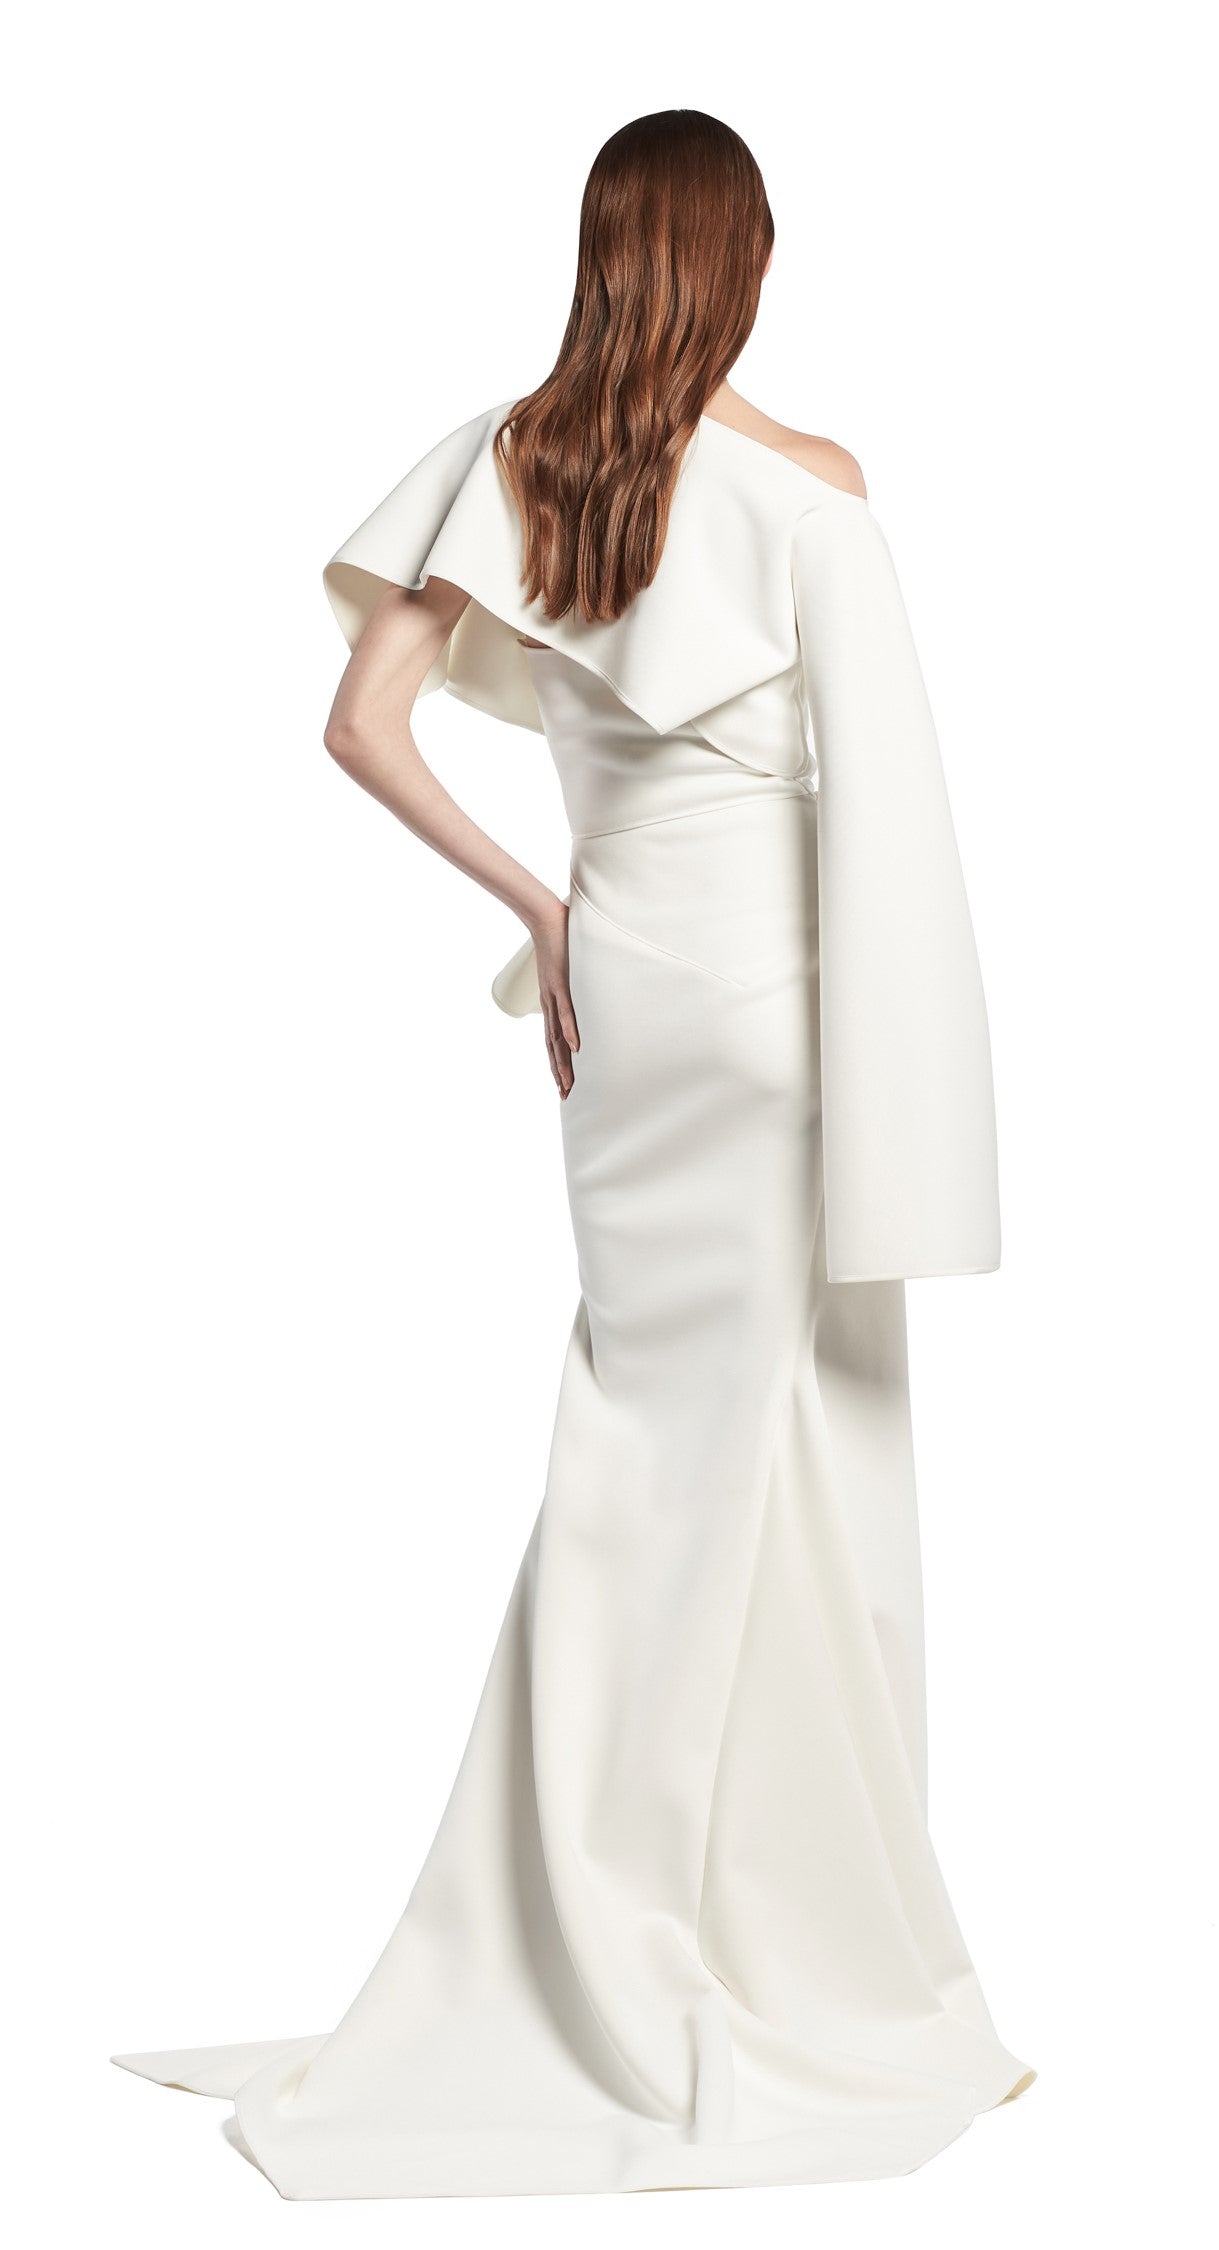 Toni Maticevski Arrival gown. Boat neckline gown with one flutter half sleeve and one long sleeve. Features a ruffle thigh high slit.